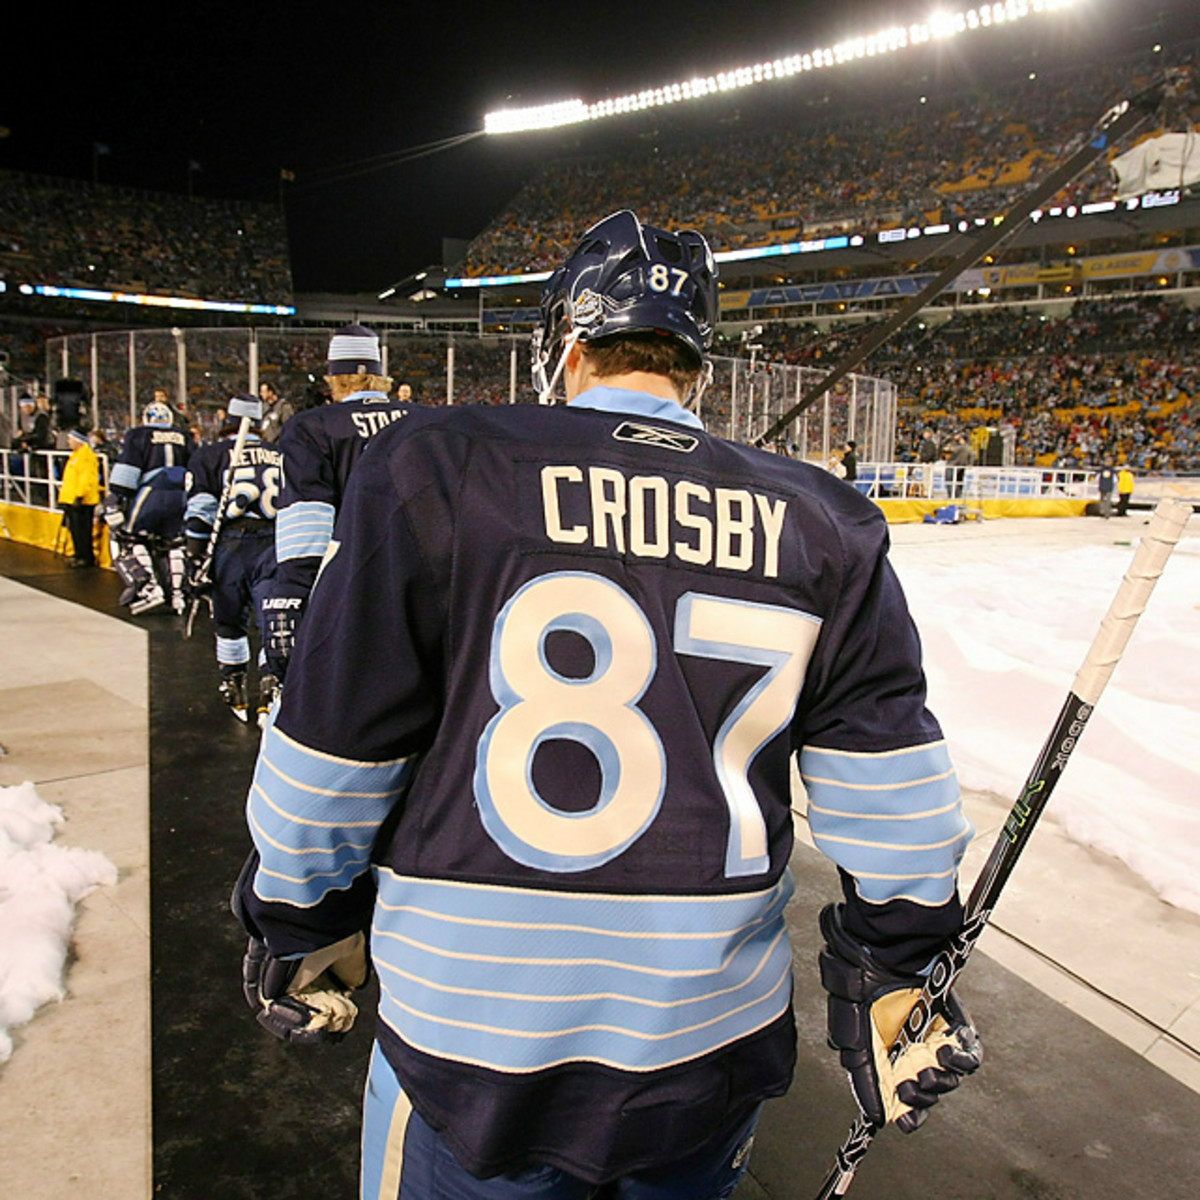 At Winter Classic, Crosby's Star Is Outshining Ovechkin's - The